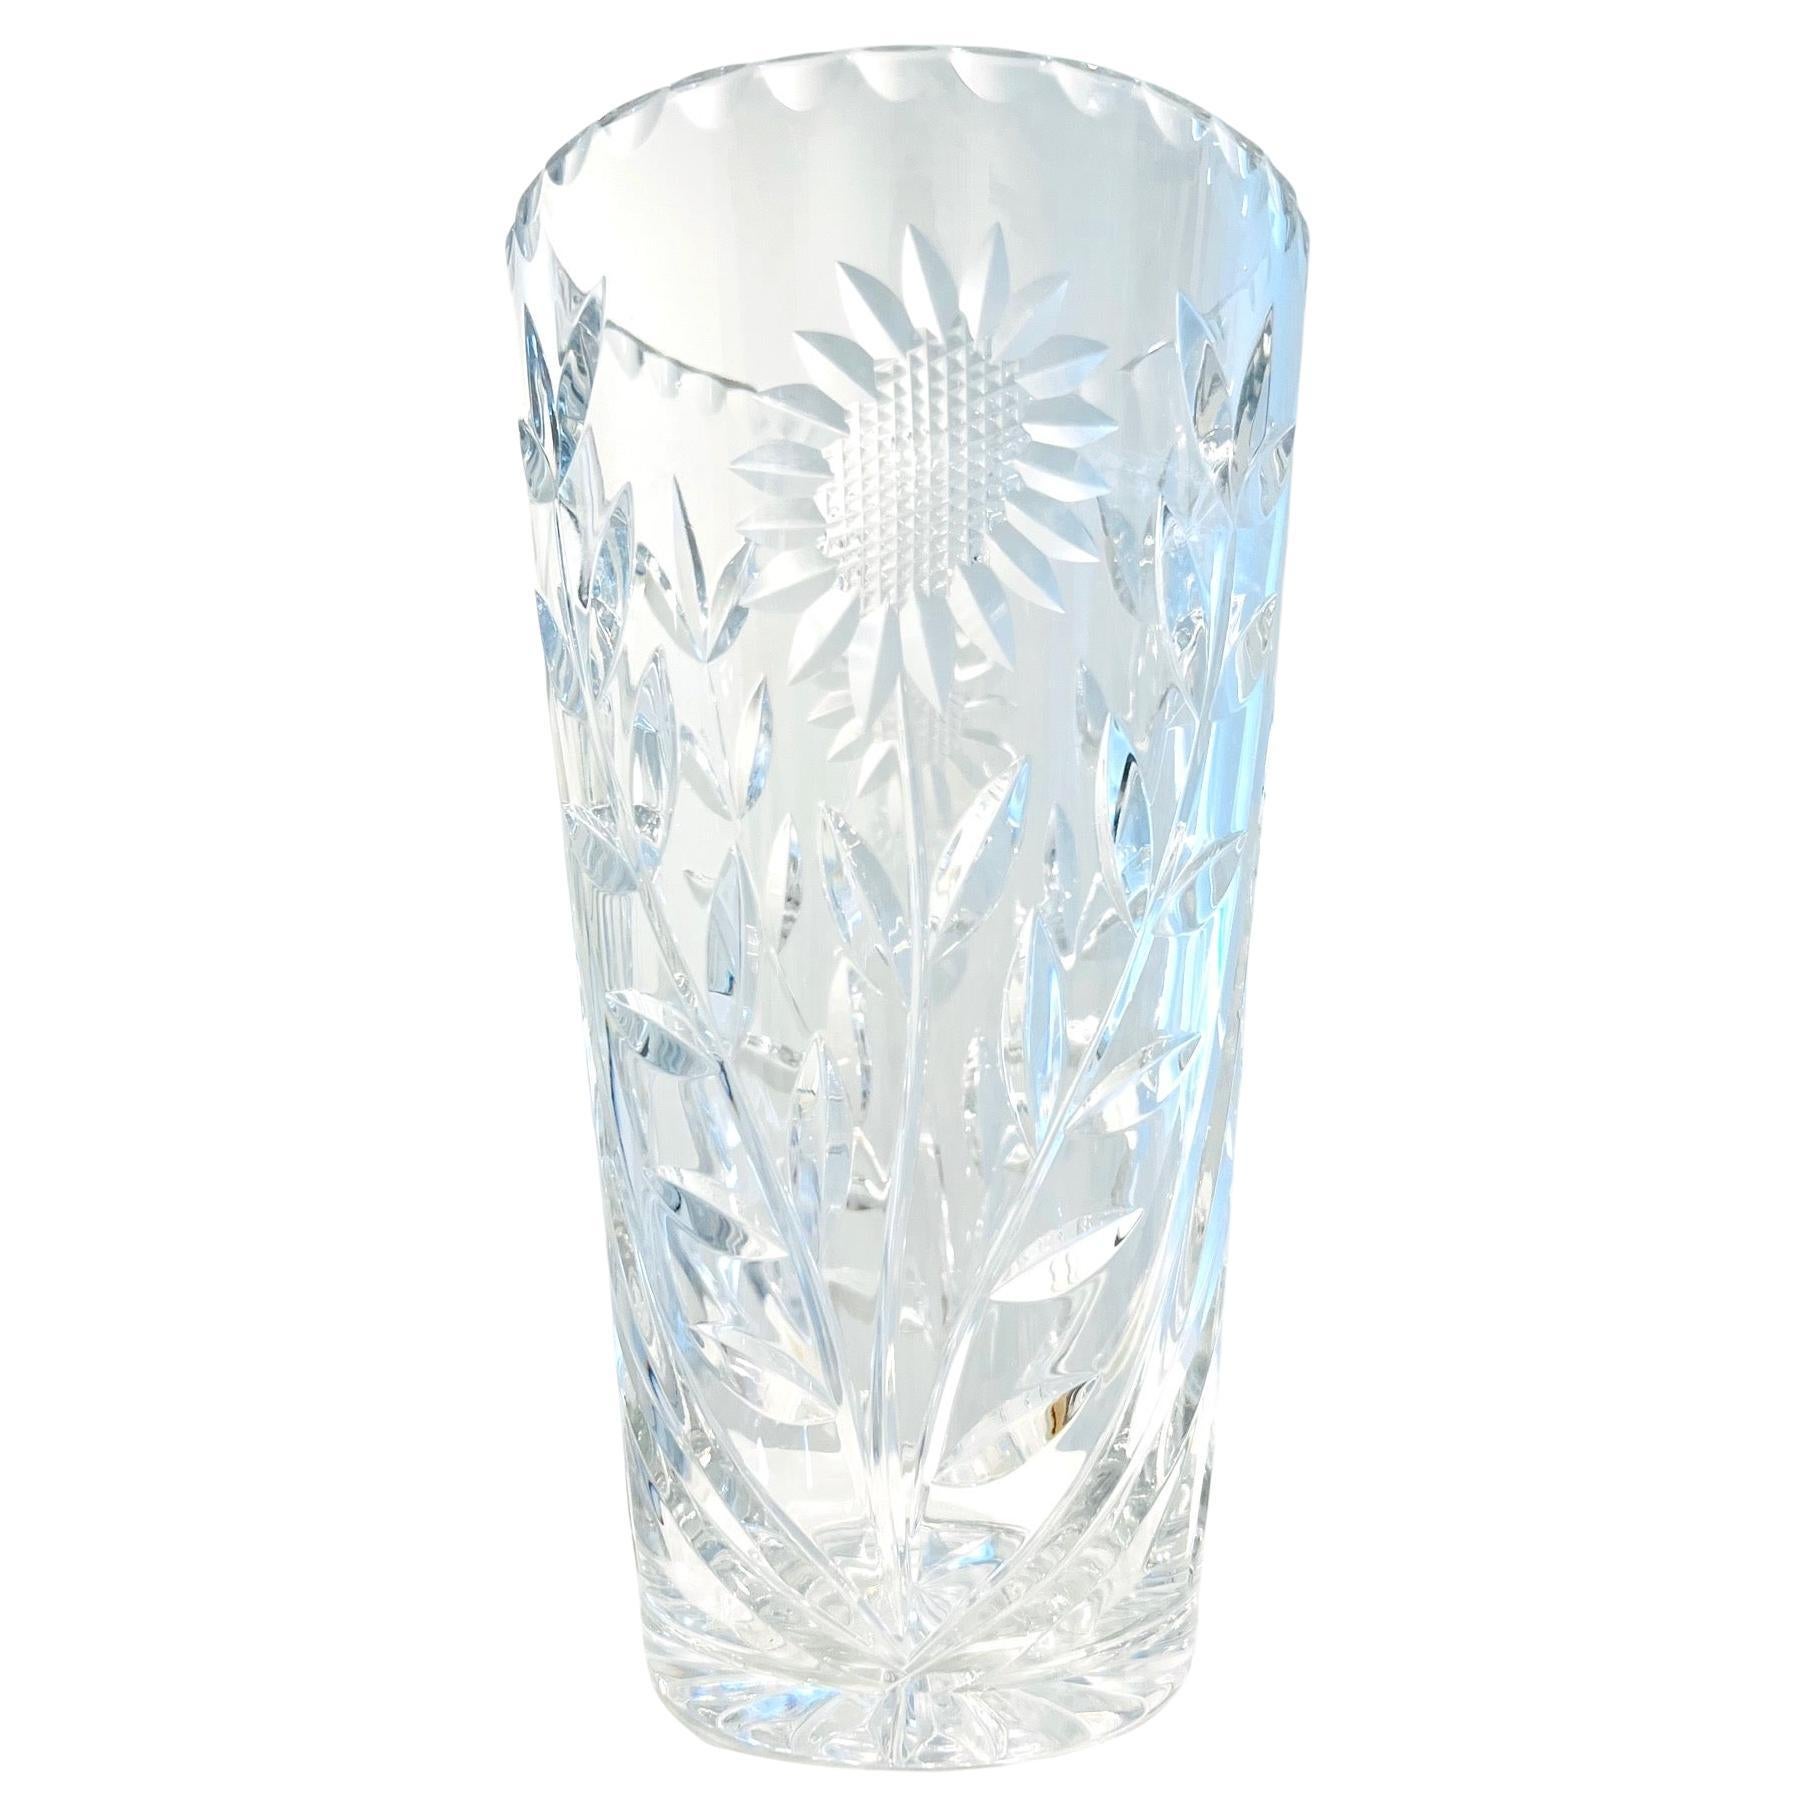 Waterford Crystal Etched Sunflower Vase with Cut Glass Designs, England, c. 2010